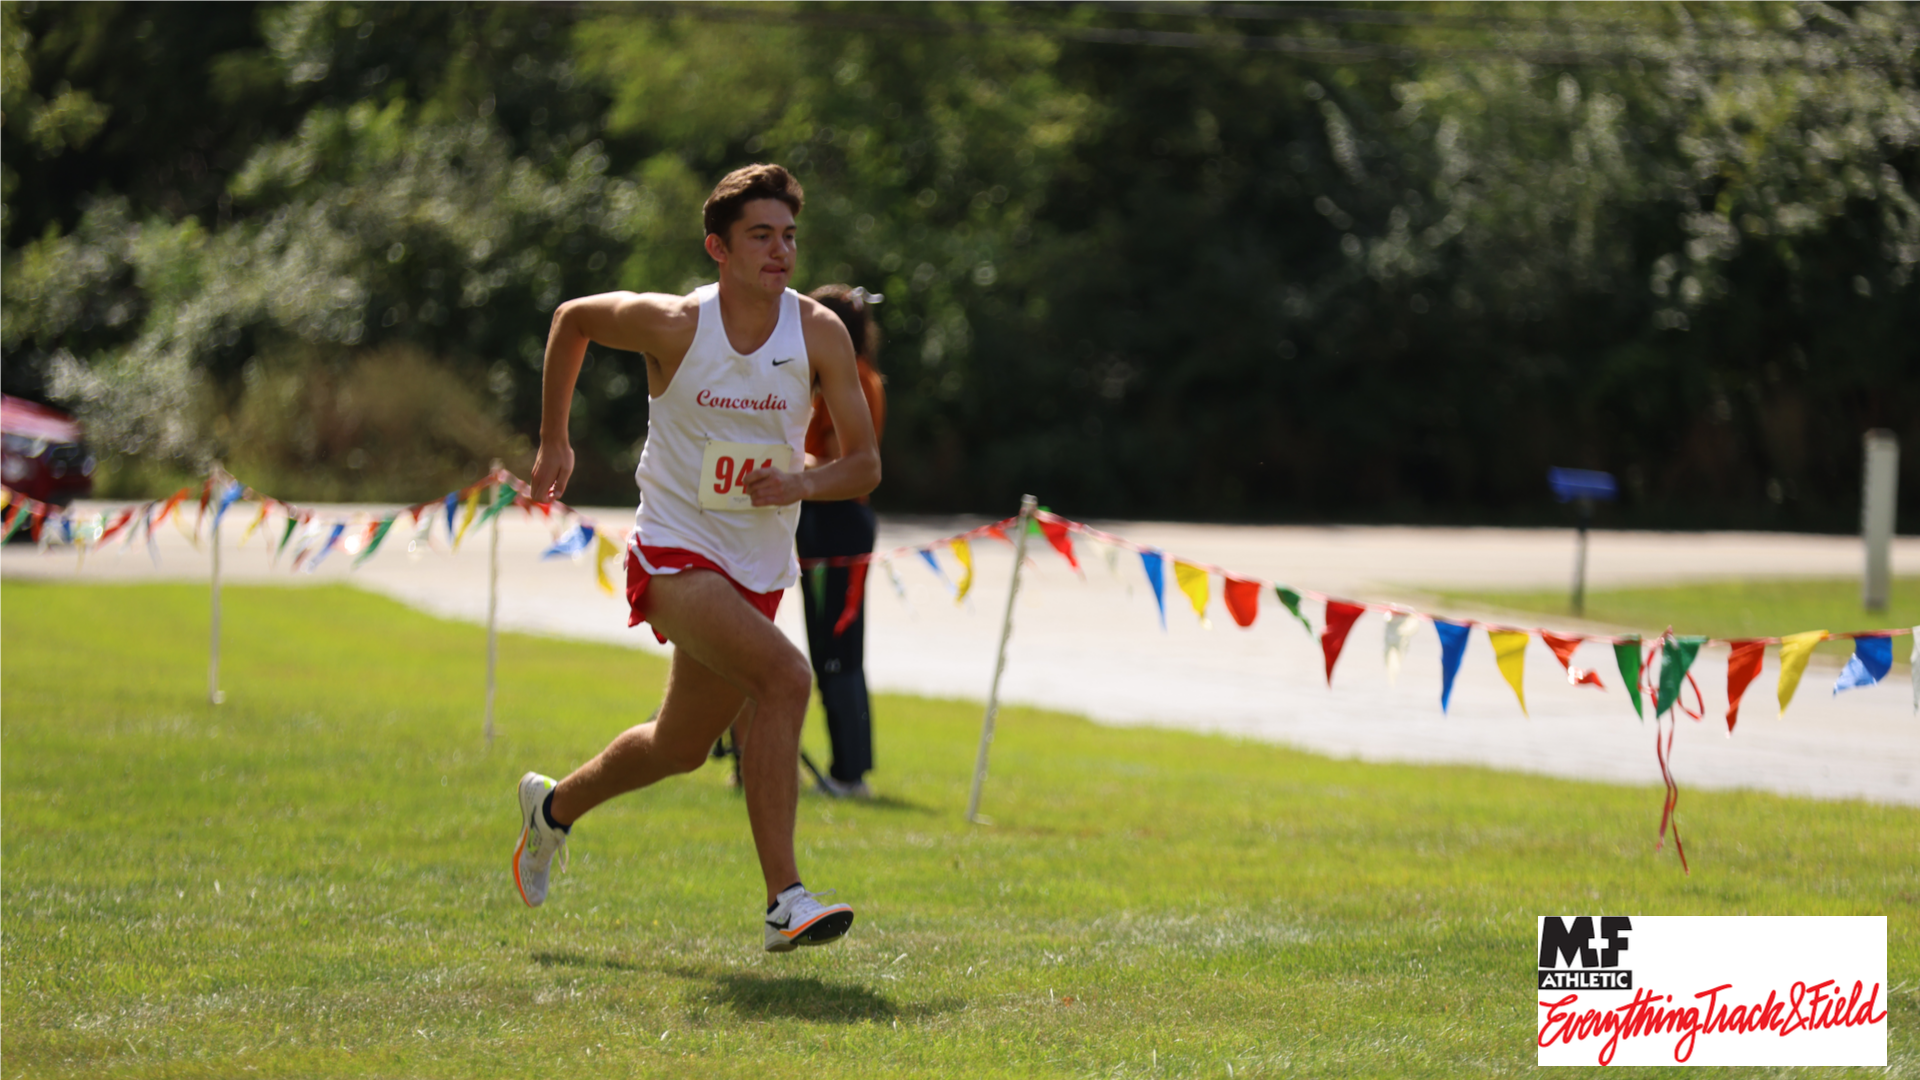 Men's Cross Country has 7 Personal Records at Bethel Invitational